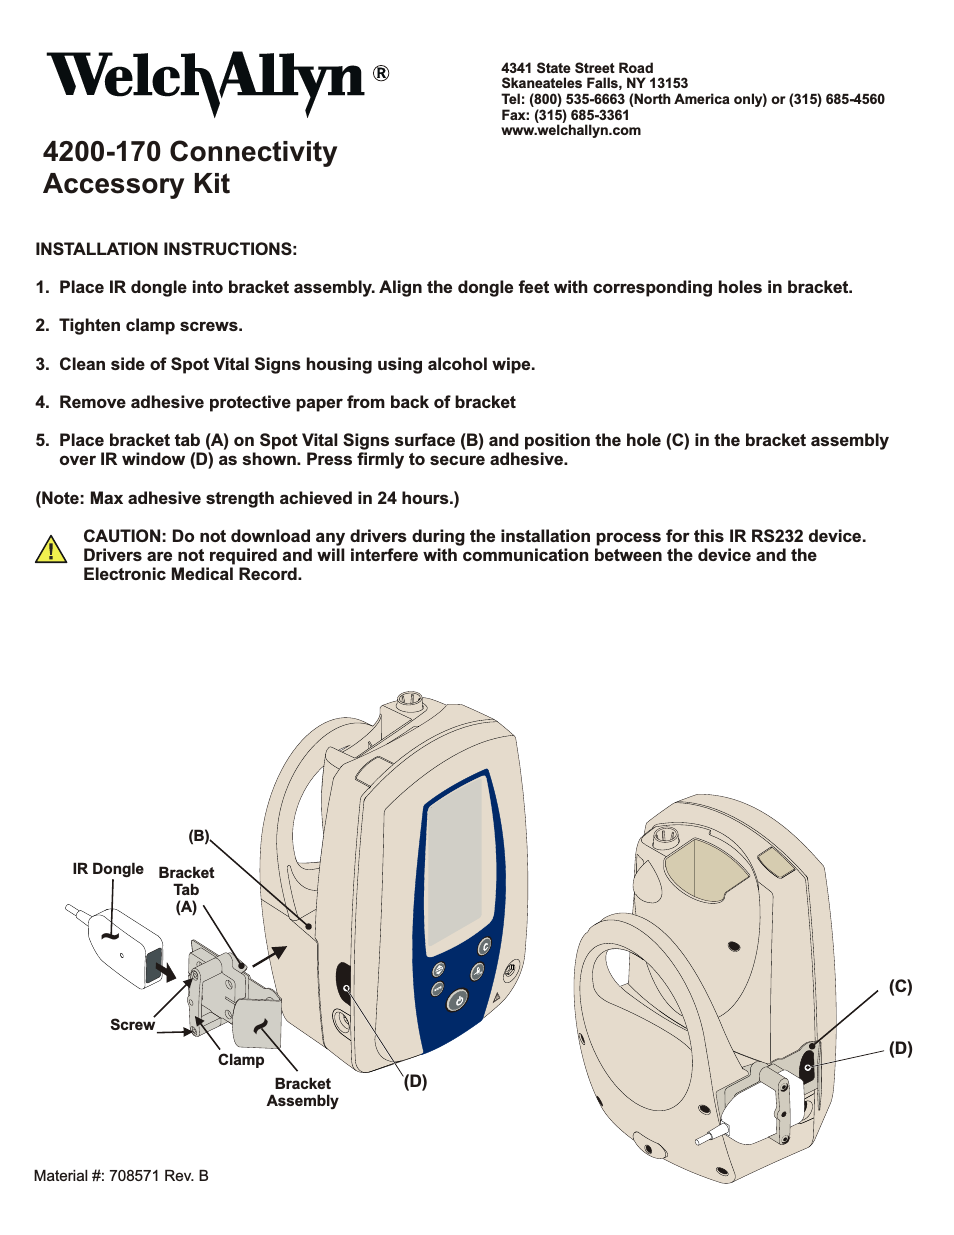 Spot Vitals Signs Connectivity Kit - Installation Guide